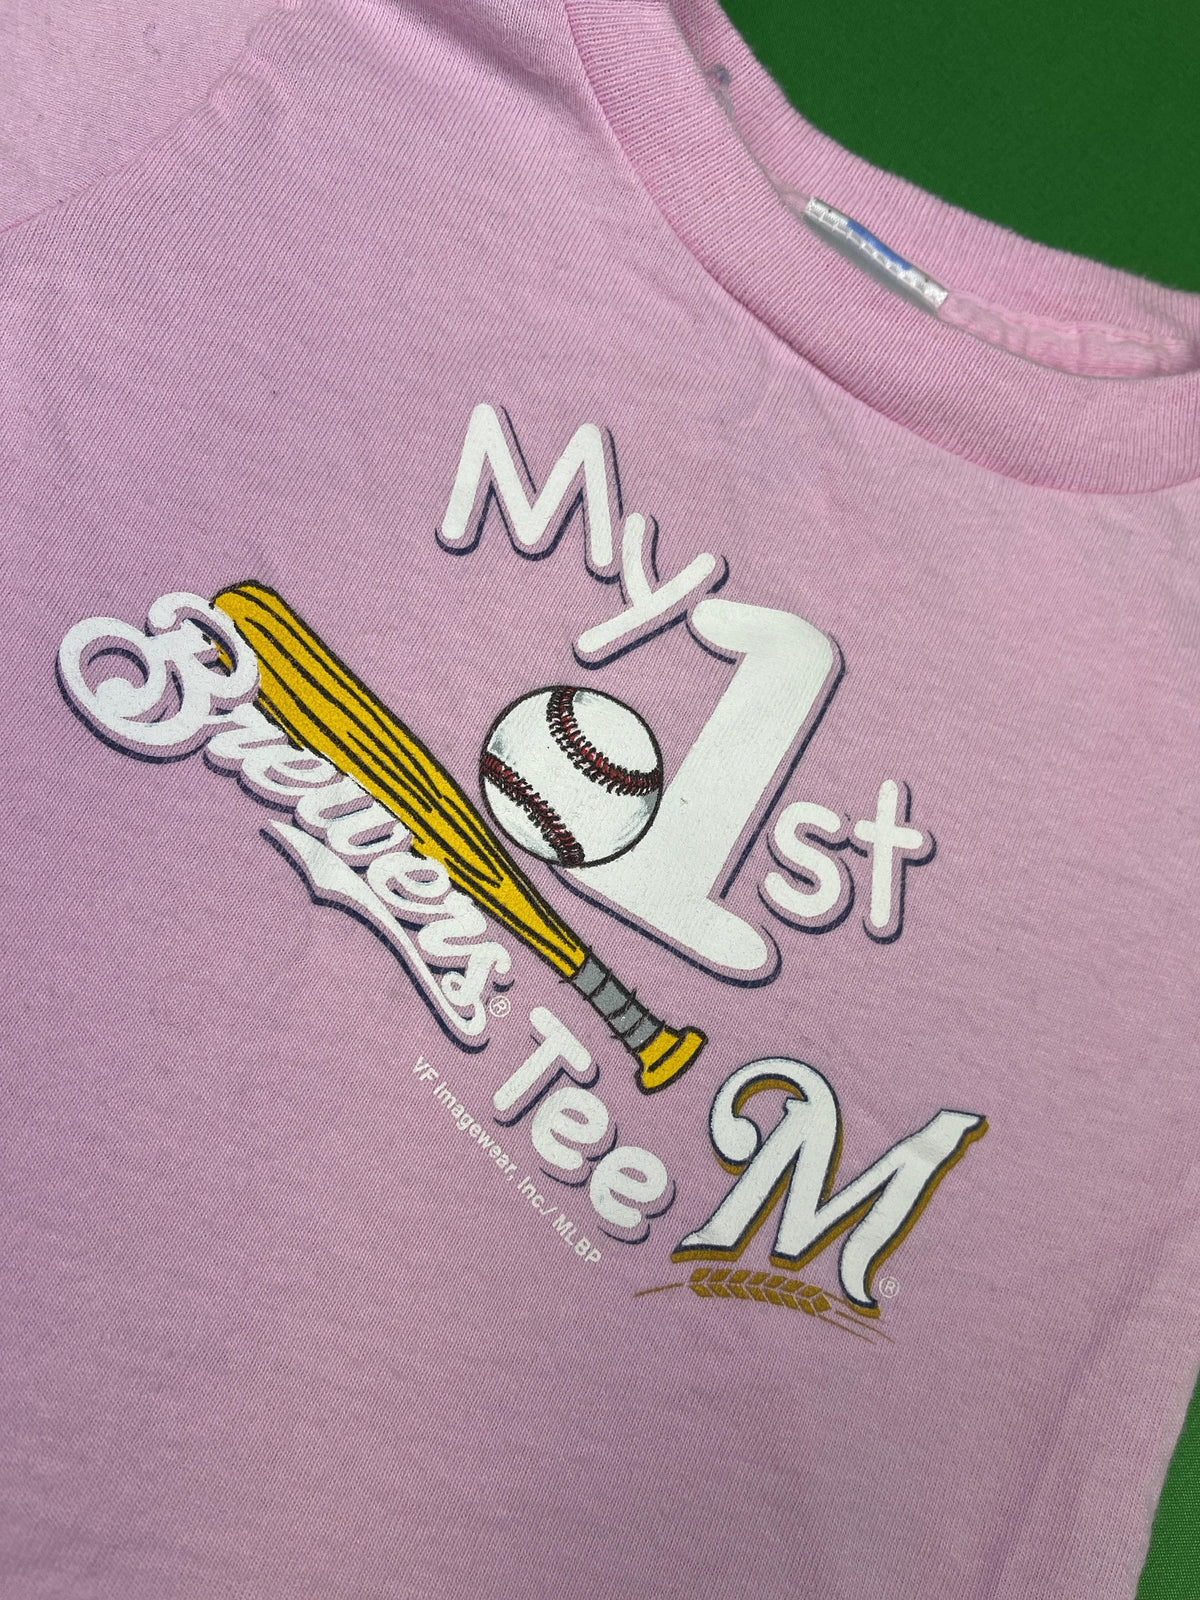 MLB Milwaukee Brewers 100% Cotton Pink T-Shirt Infant Baby 6-9 months